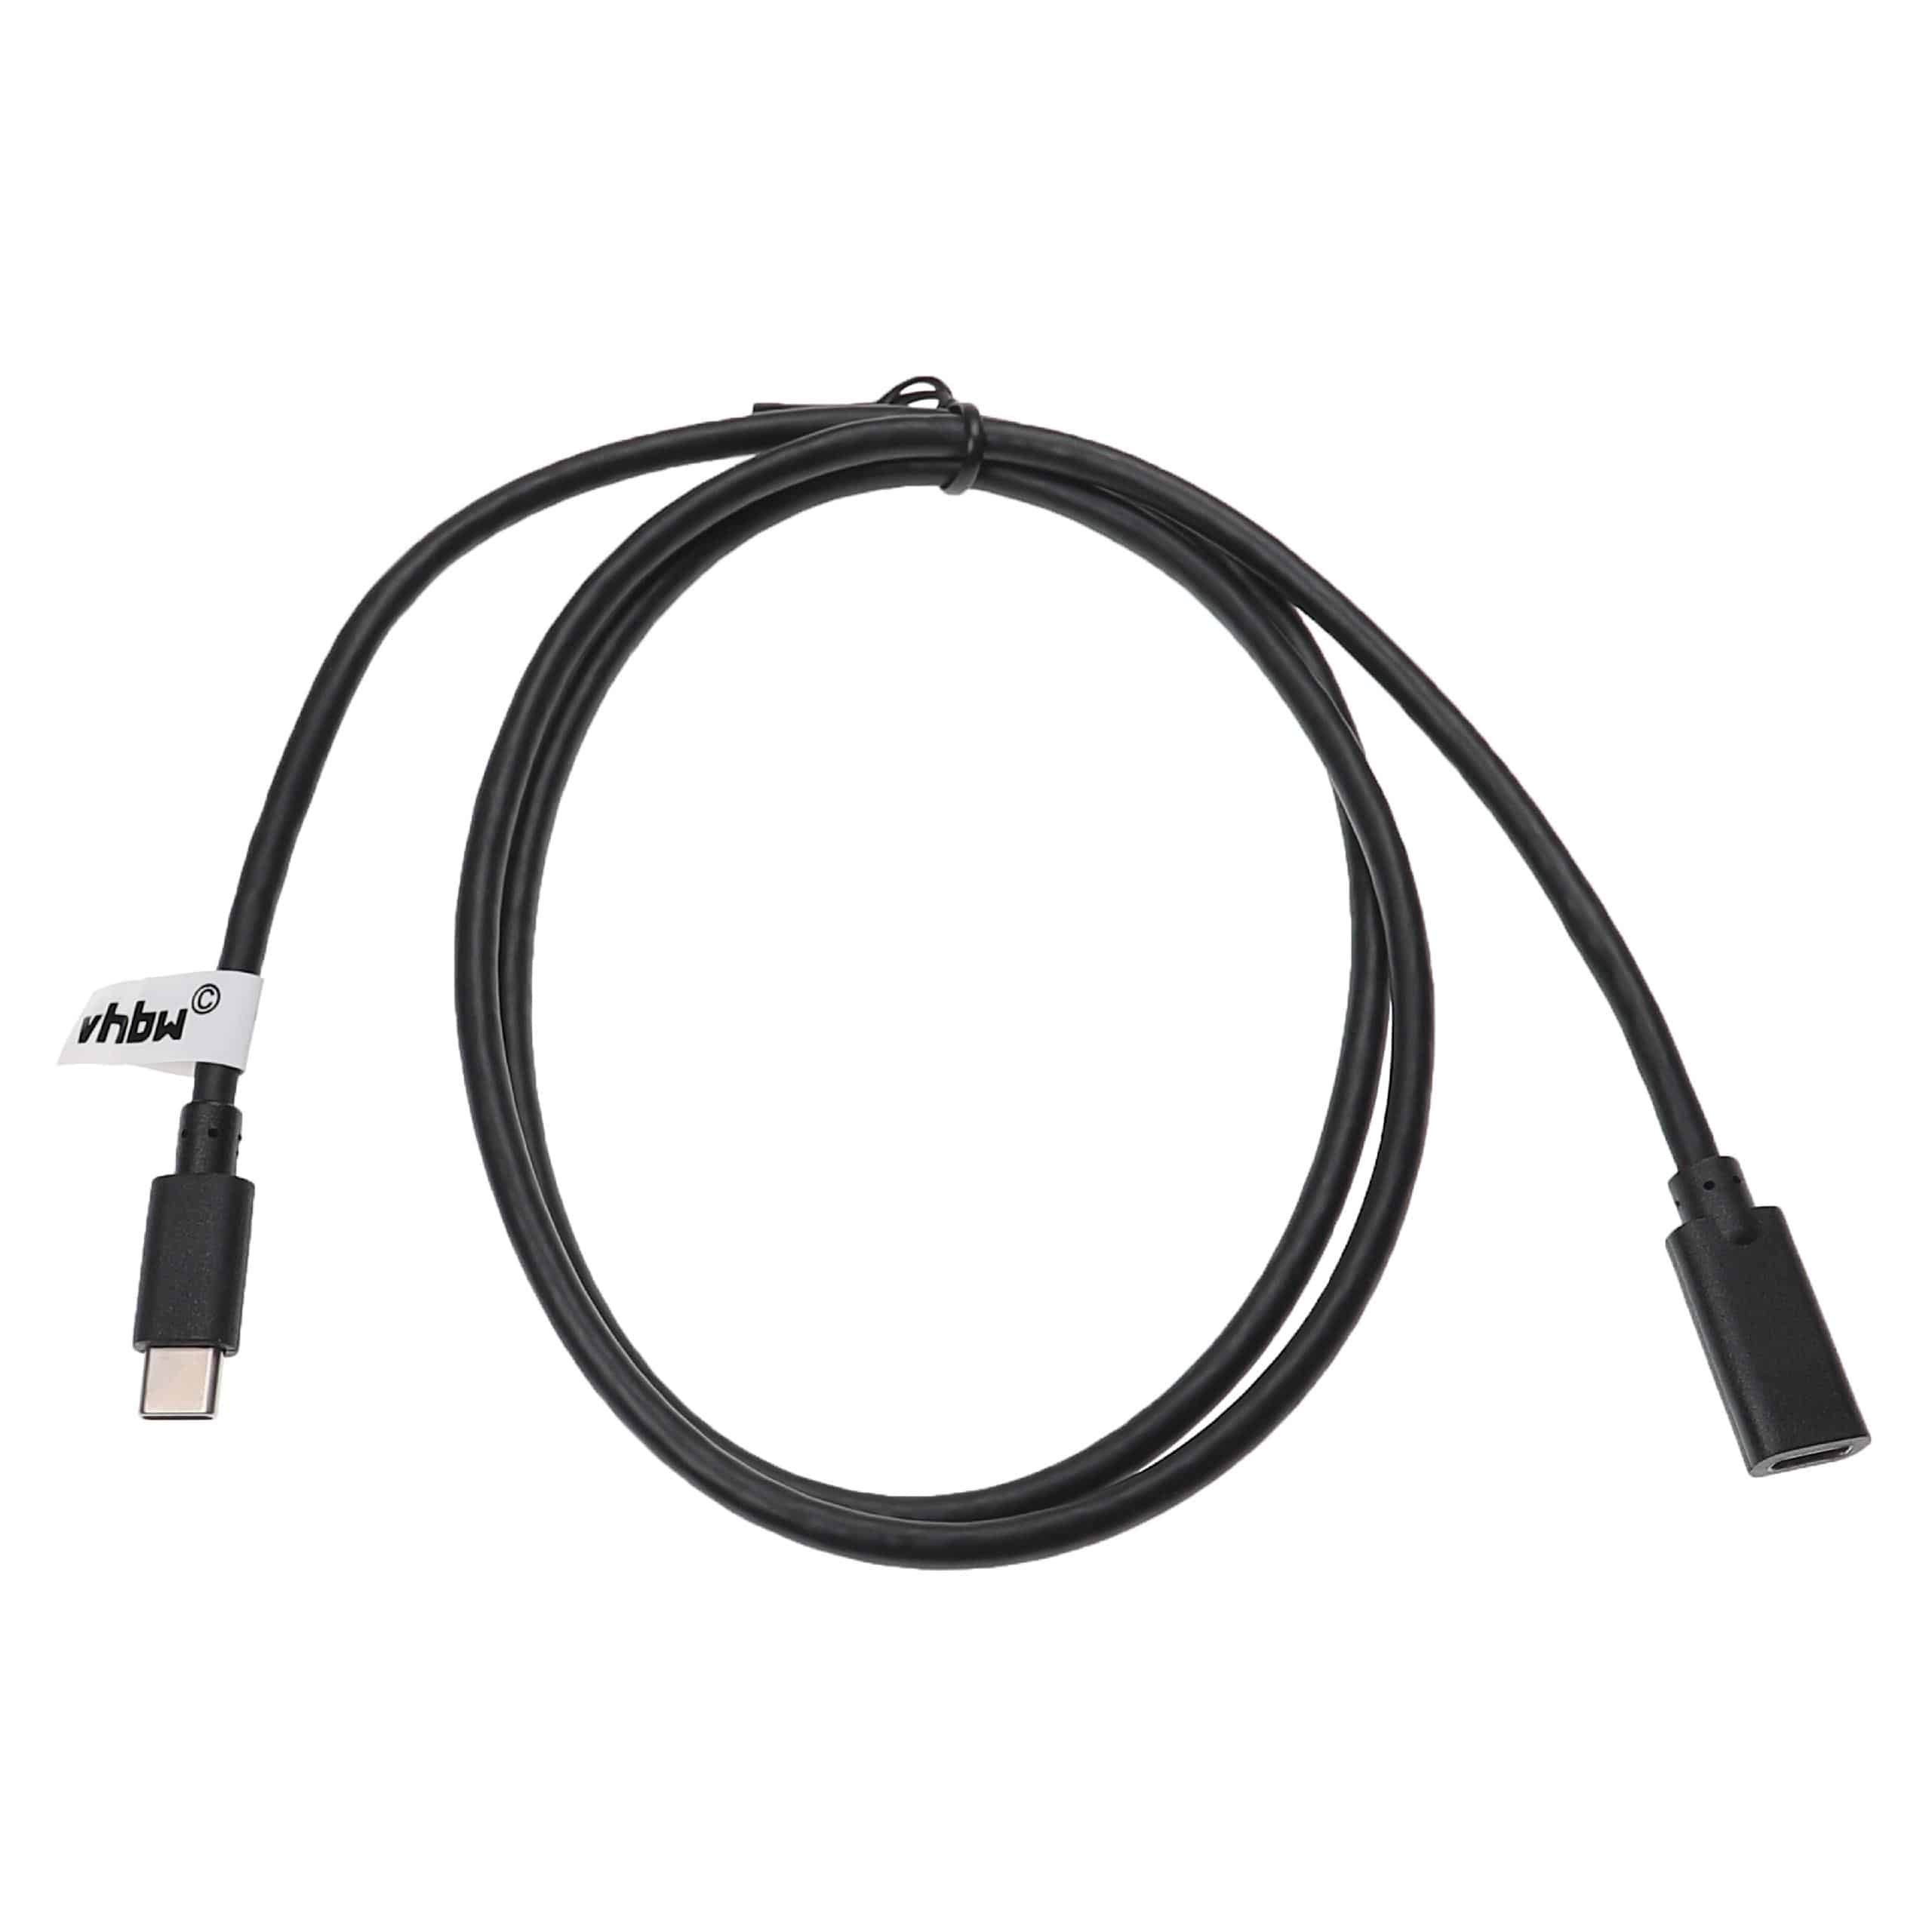 USB C Extension Cable for various Tablets, Notebooks, Smartphones, PCs - 1 m Black, USB 3.1 C Cable